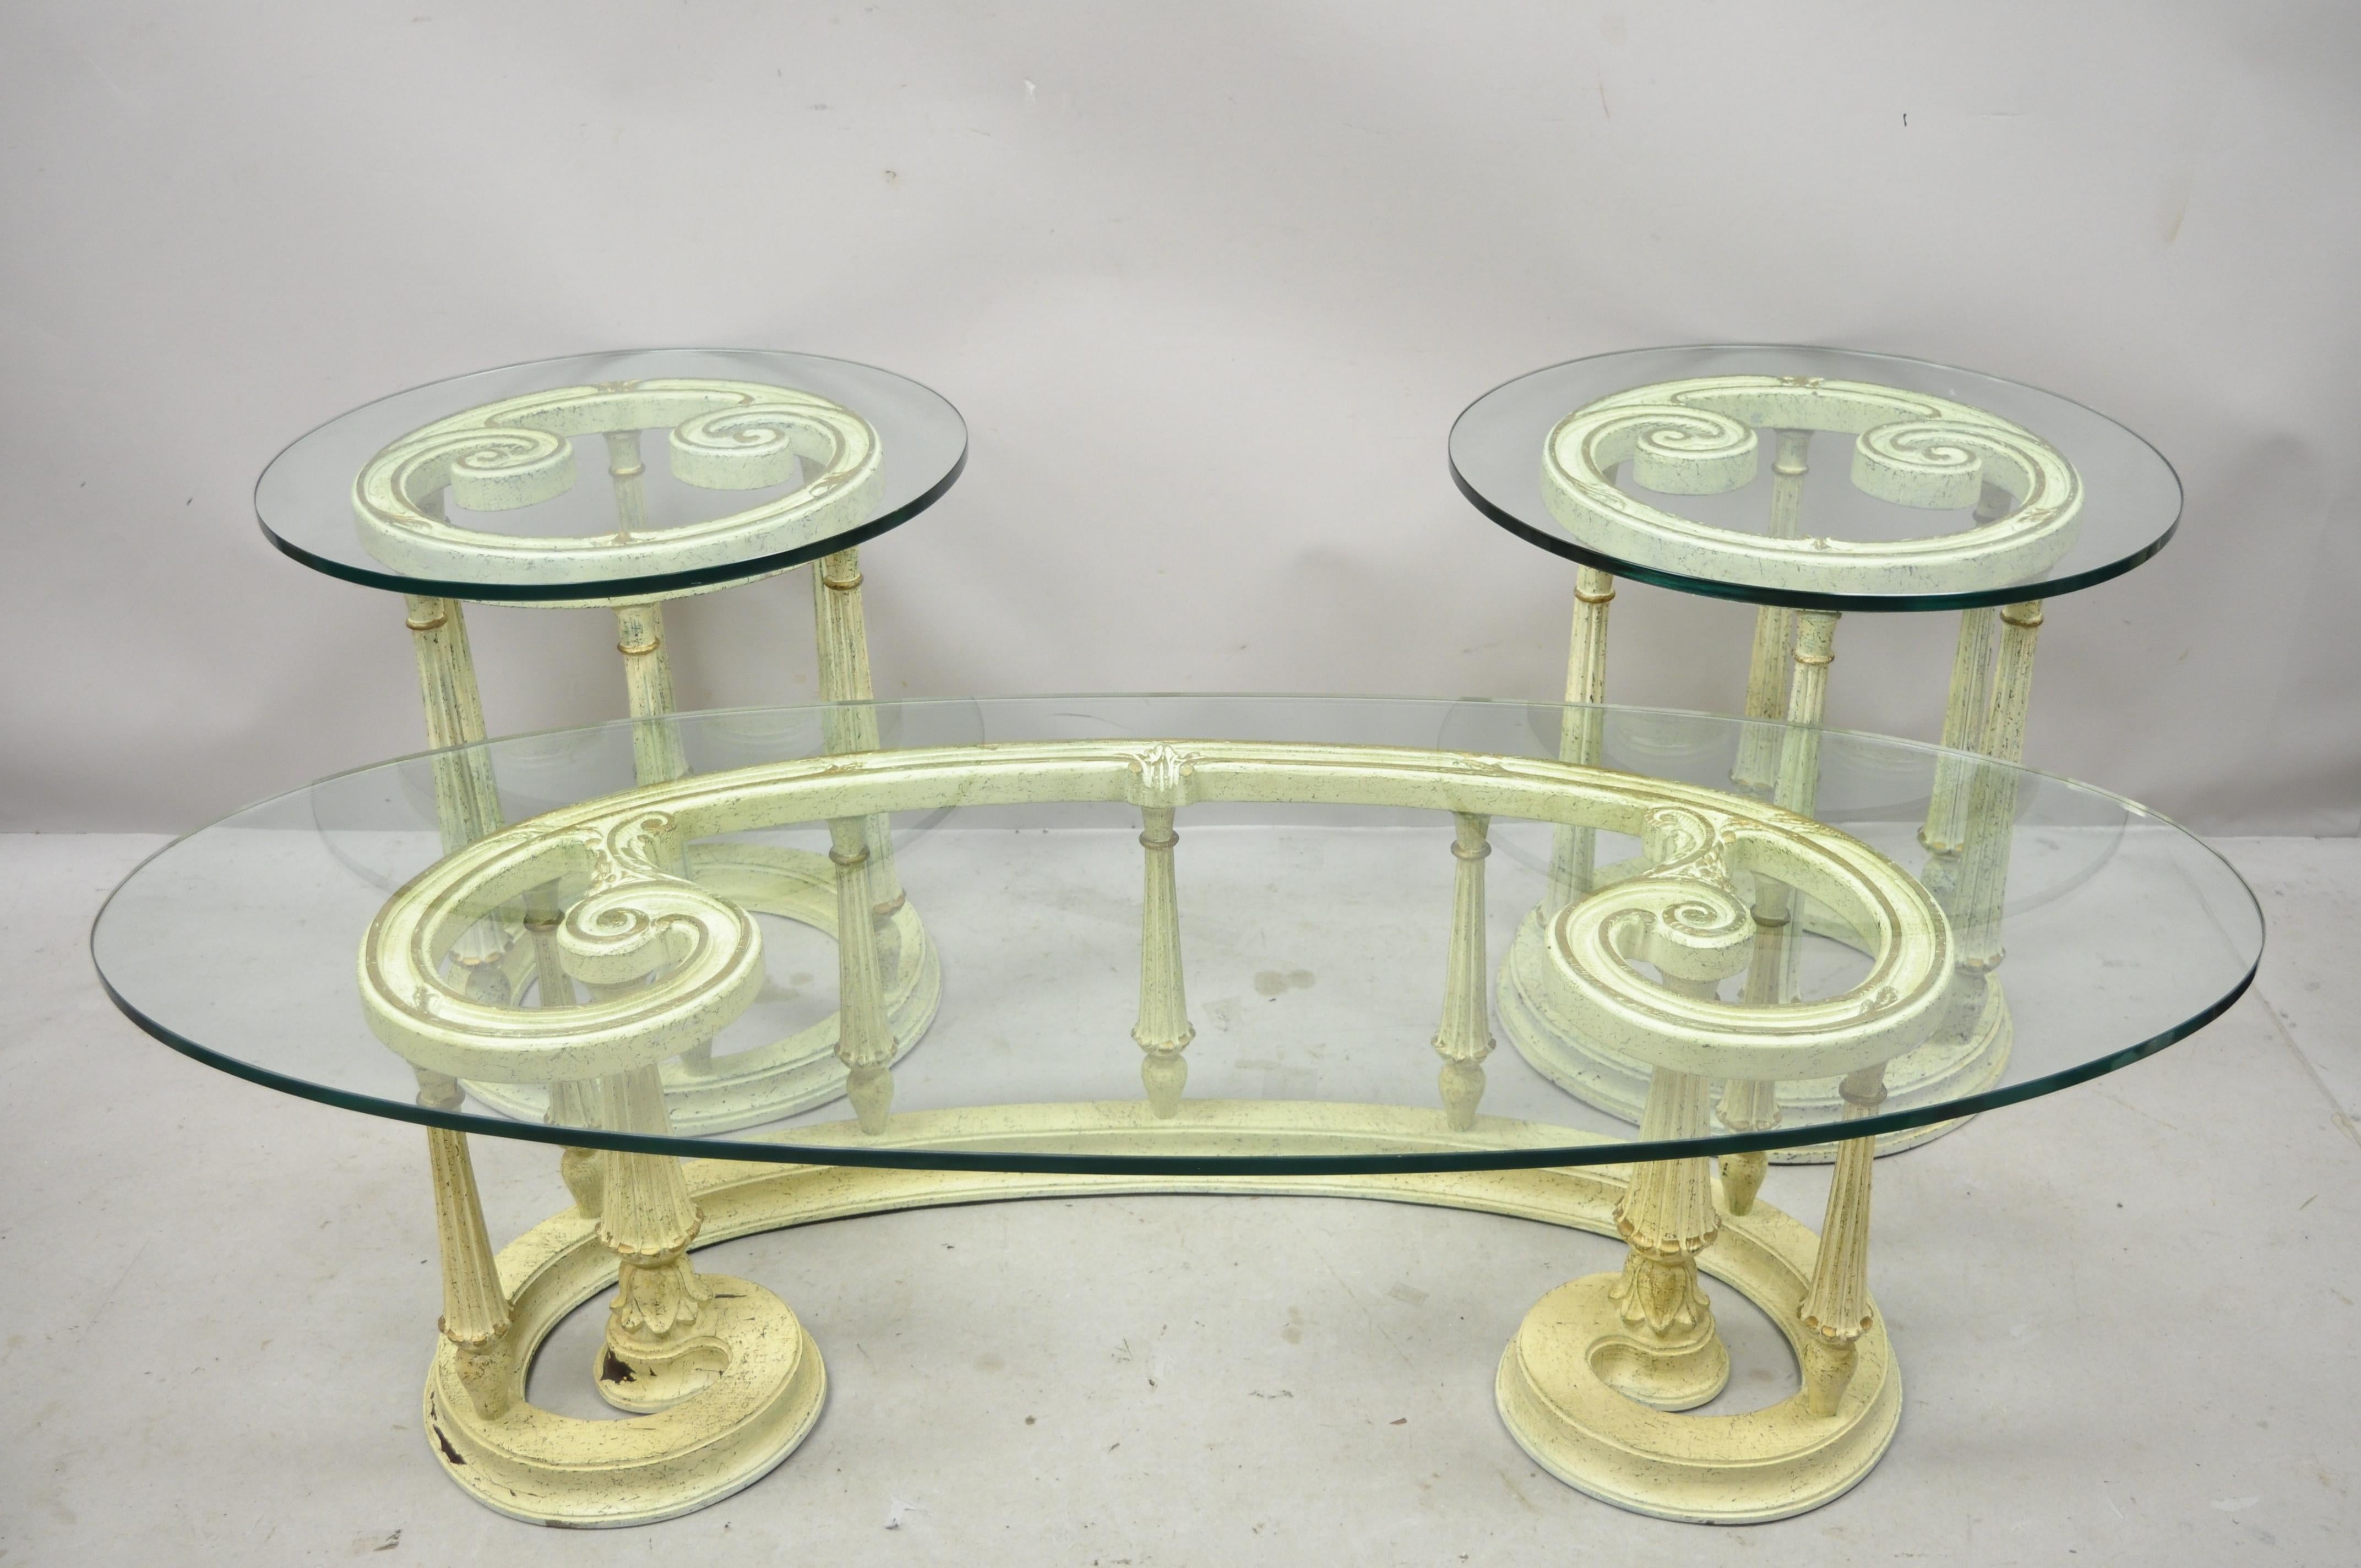 French Provincial Italian Scrollwork Wood Base Glass Top Coffee Table, 3 Pc Set For Sale 6